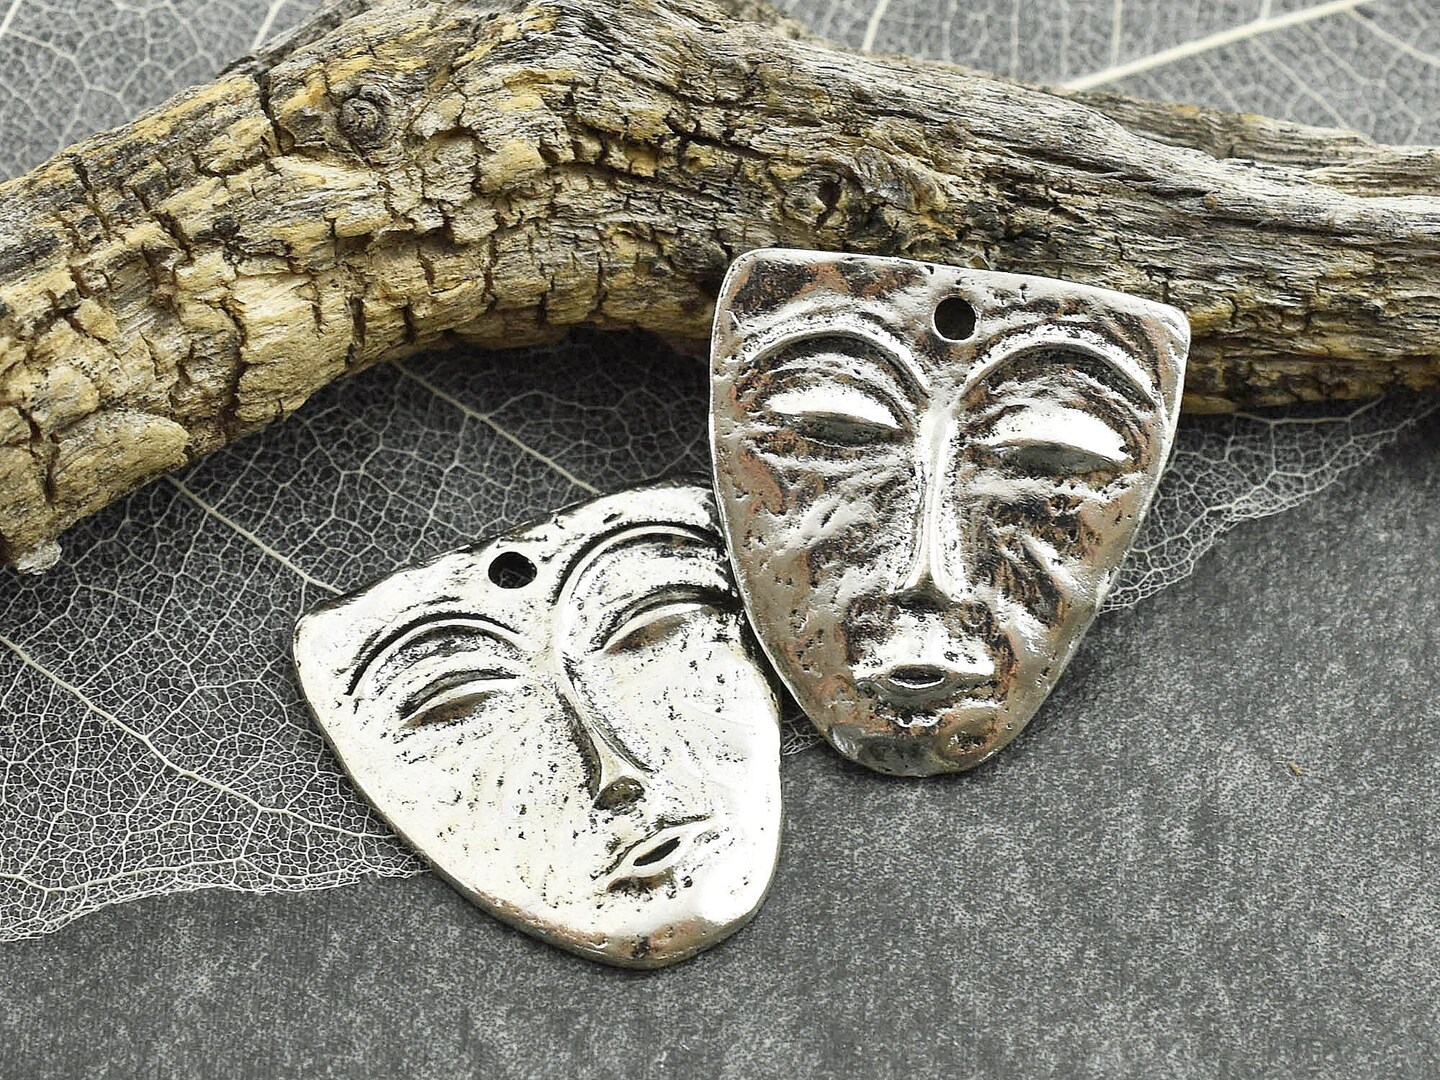 *10* 25x24mm Antique Silver Maya Mask Charms